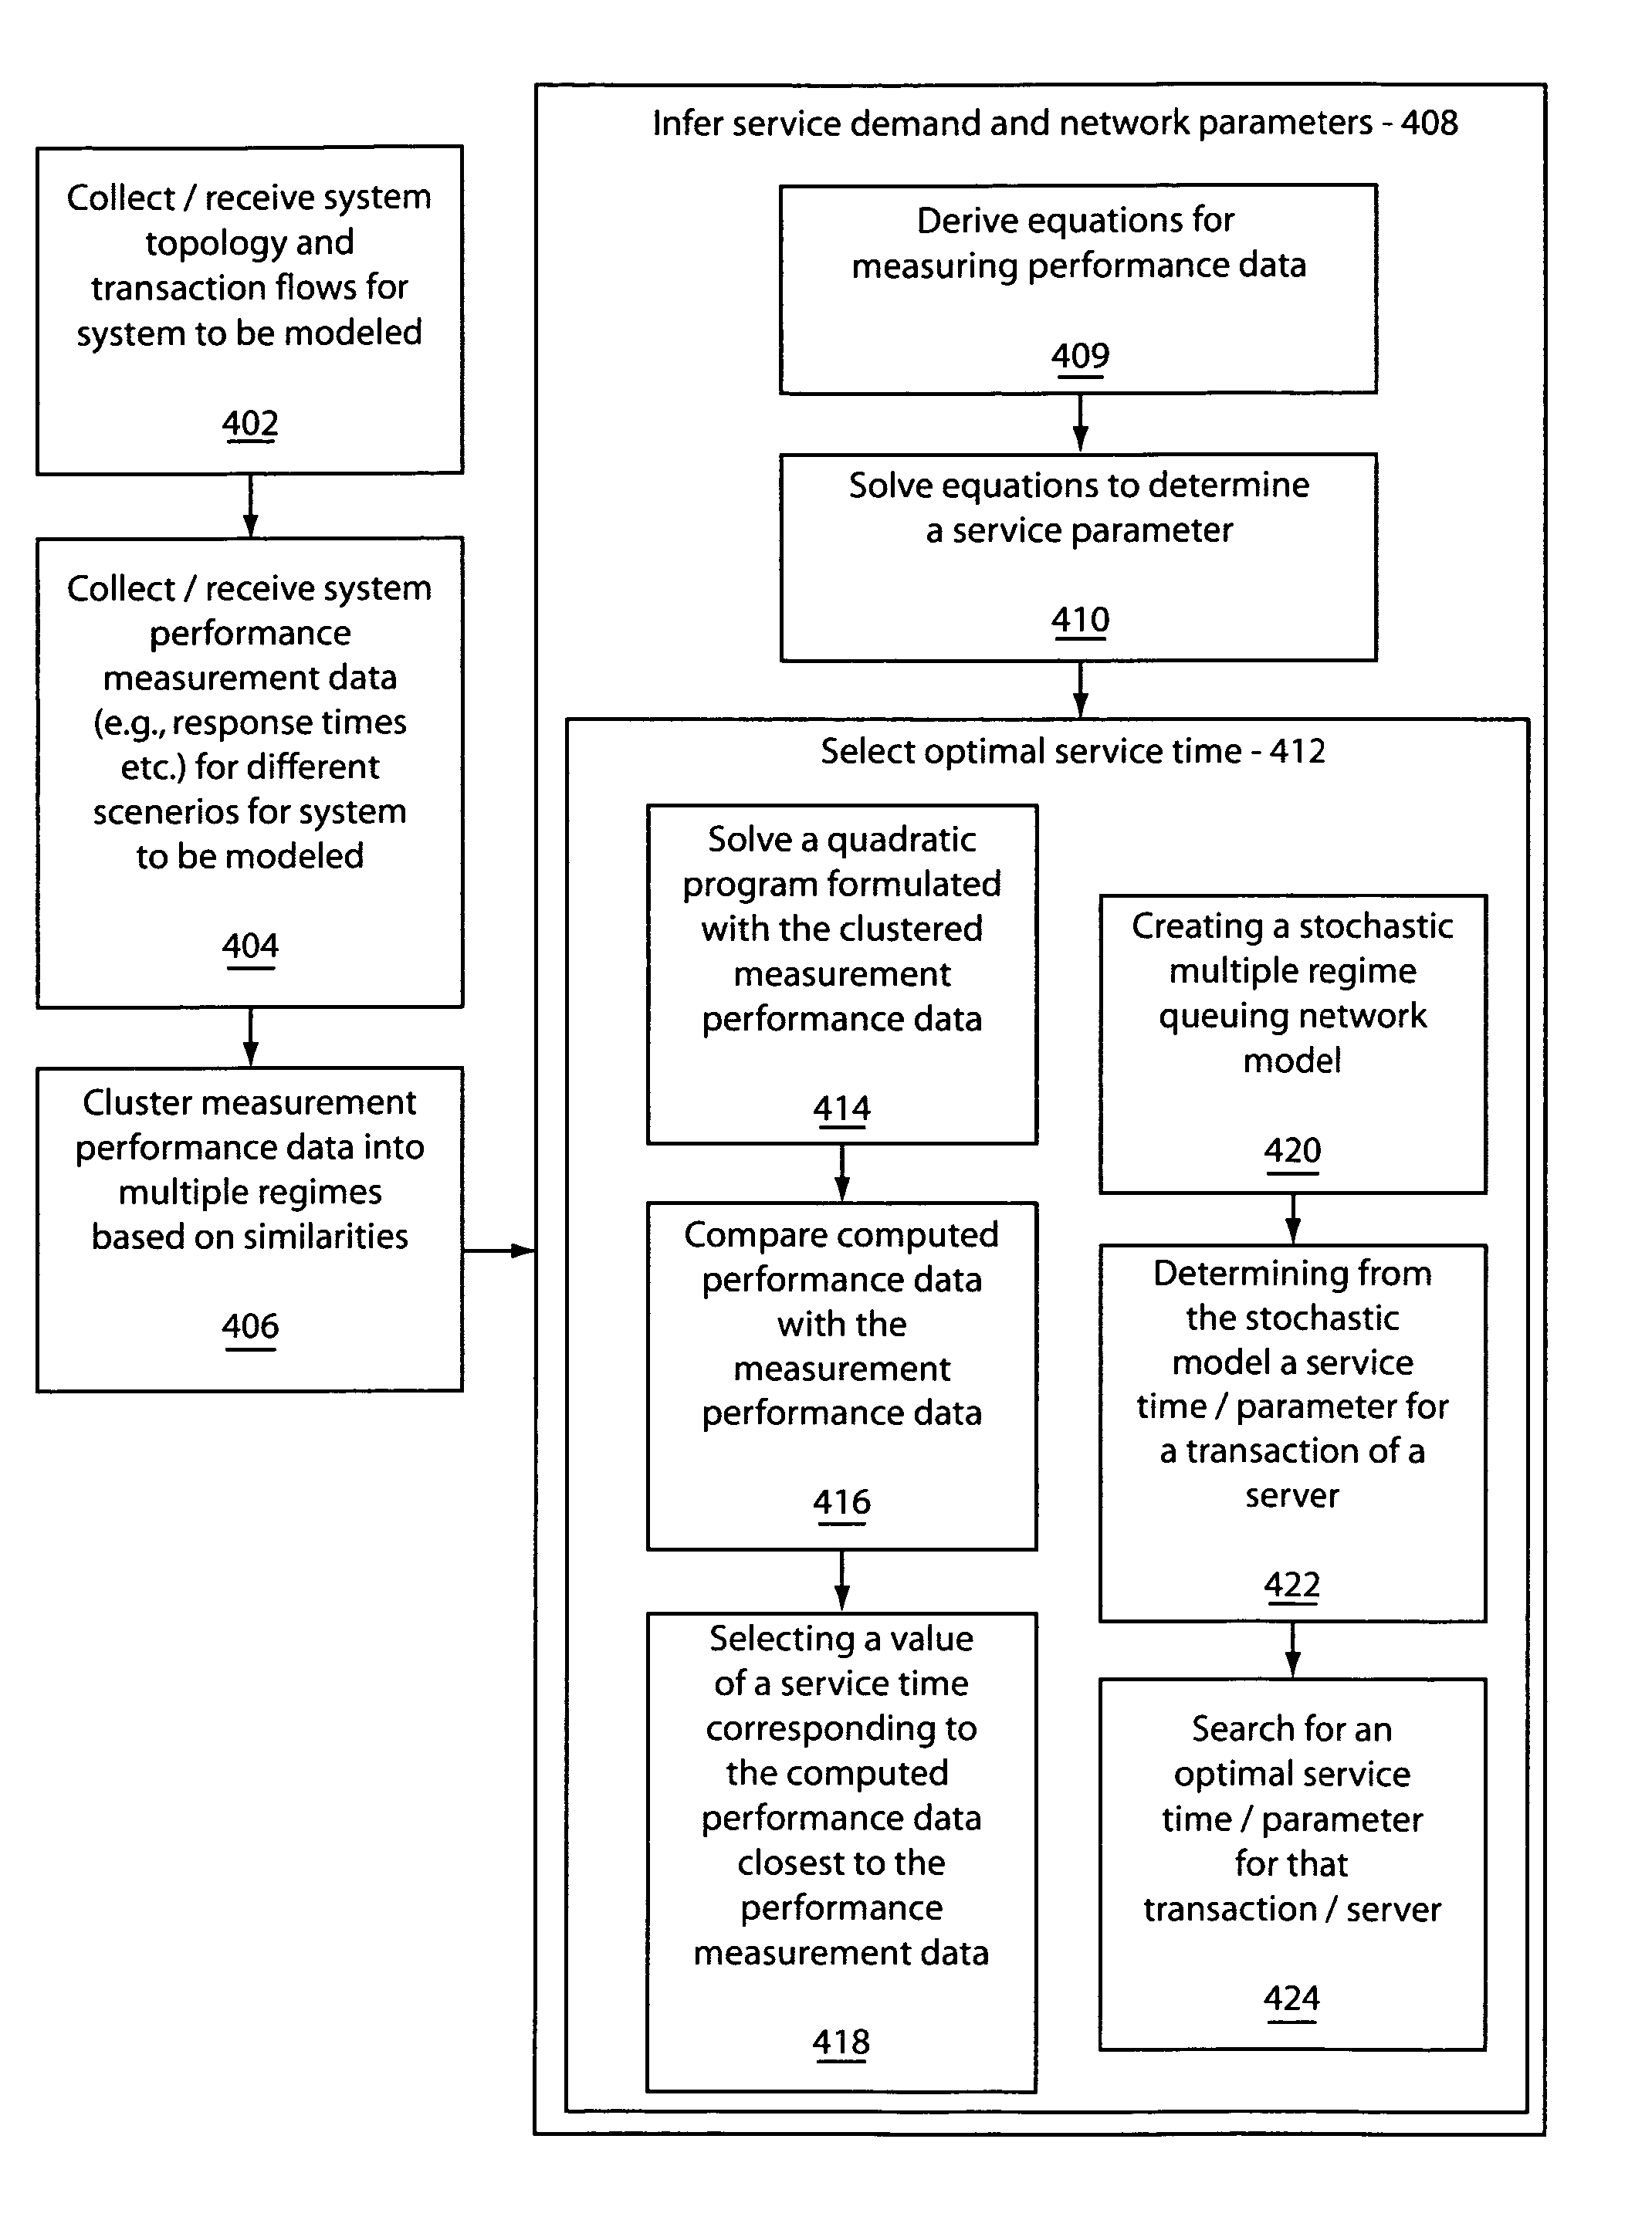 Method and system for on-line performance modeling using inference for real production IT systems